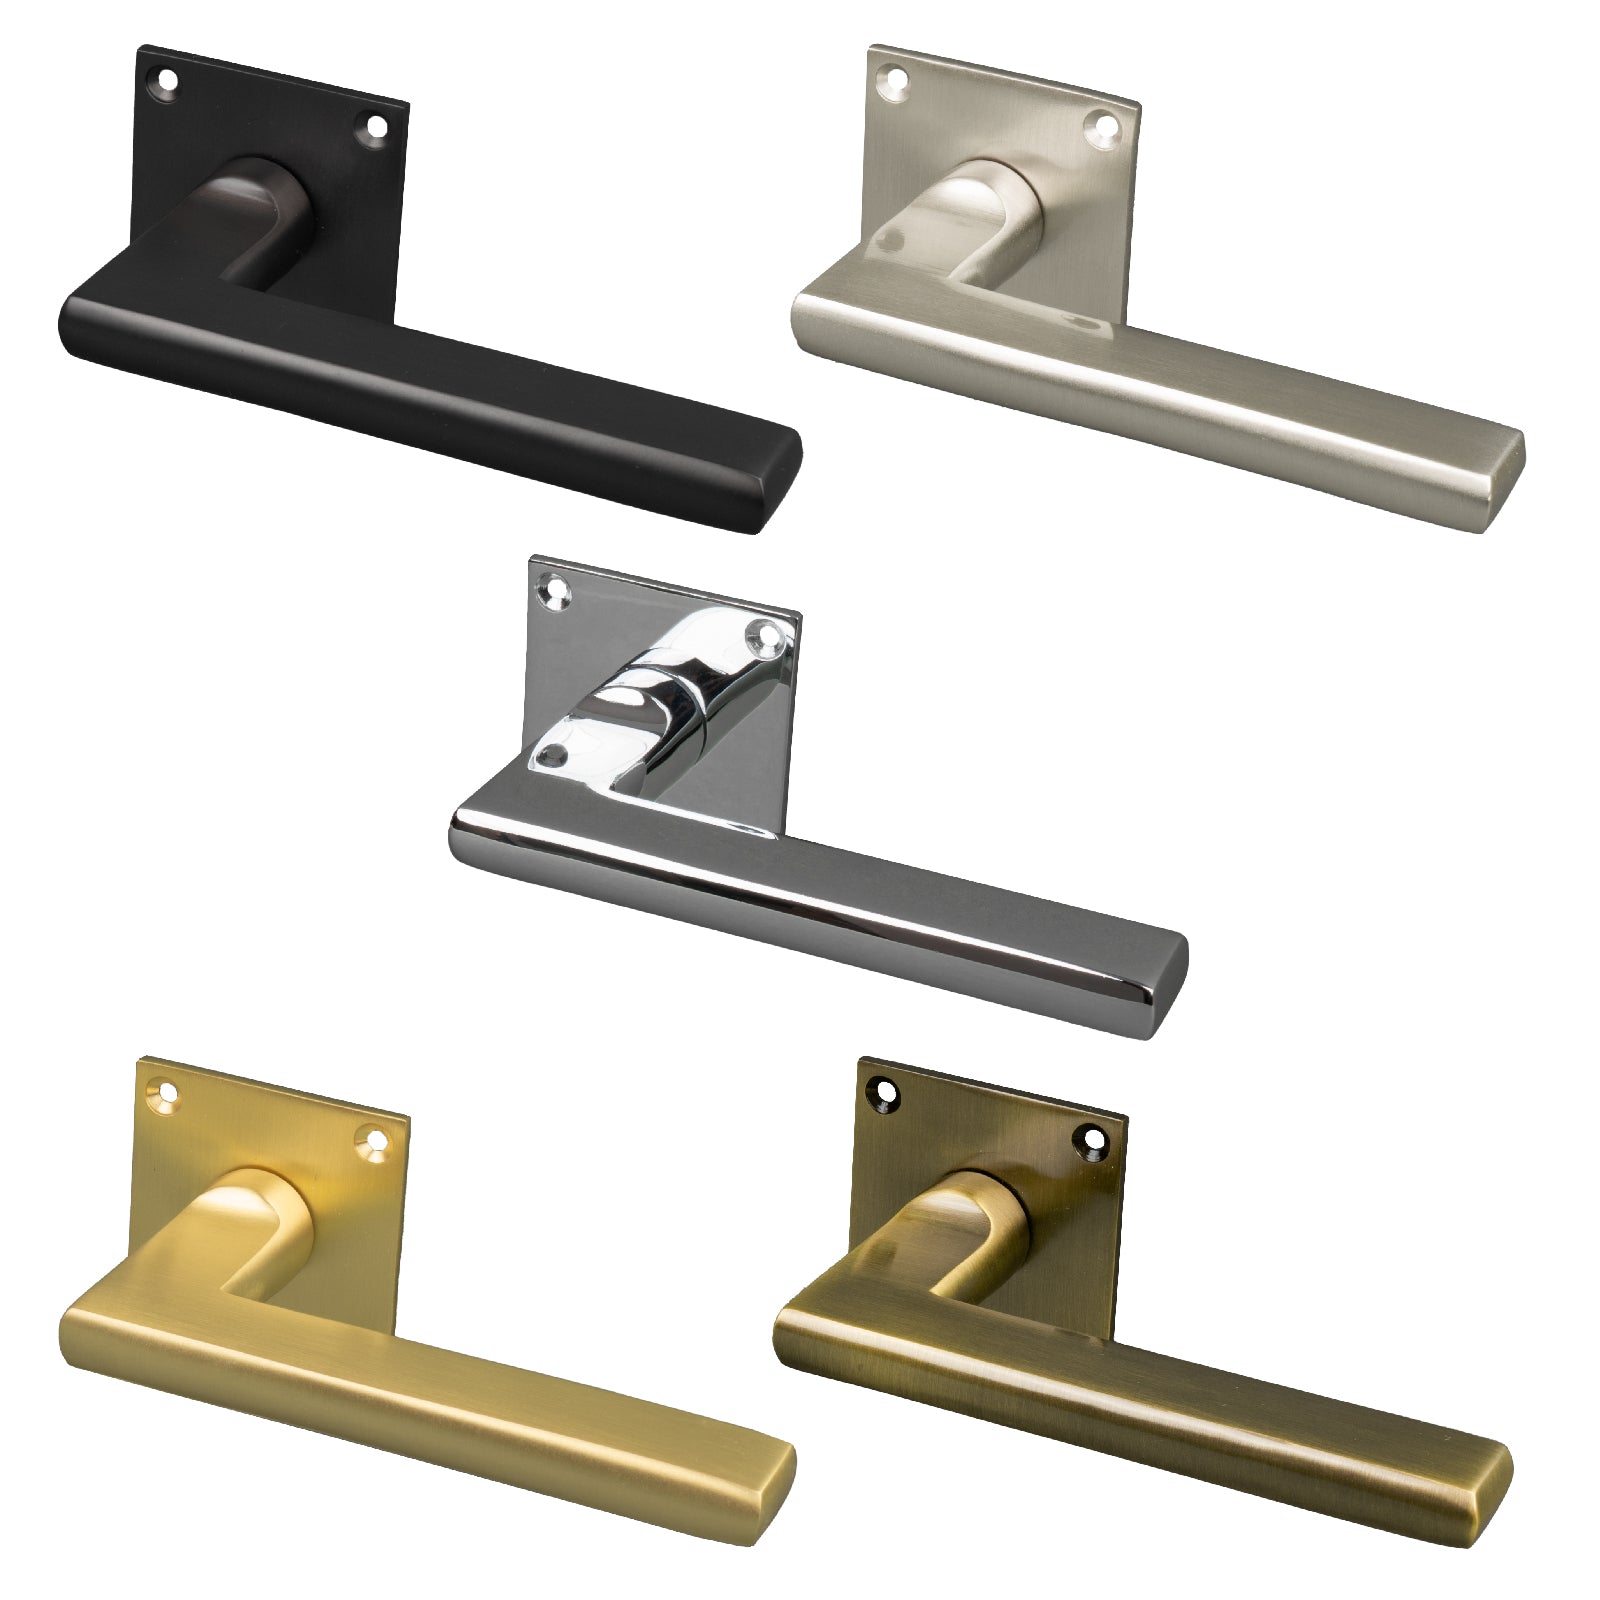 Trident Square Rose Door Handles Low Profile, solid brass lever on rose handles